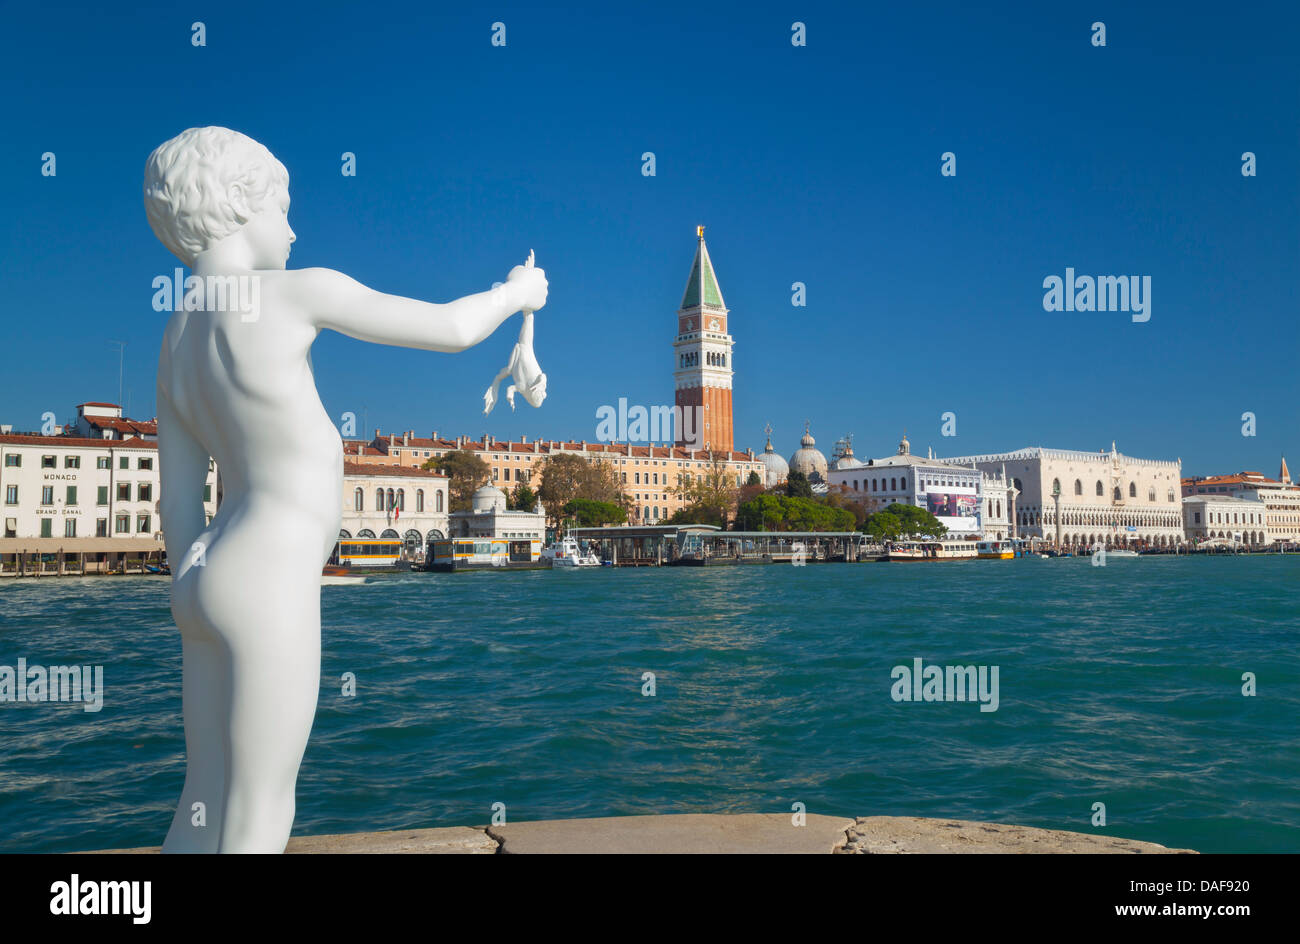 Italy, Venice, Statue Boy with Frog by Charles Ray Stock Photo